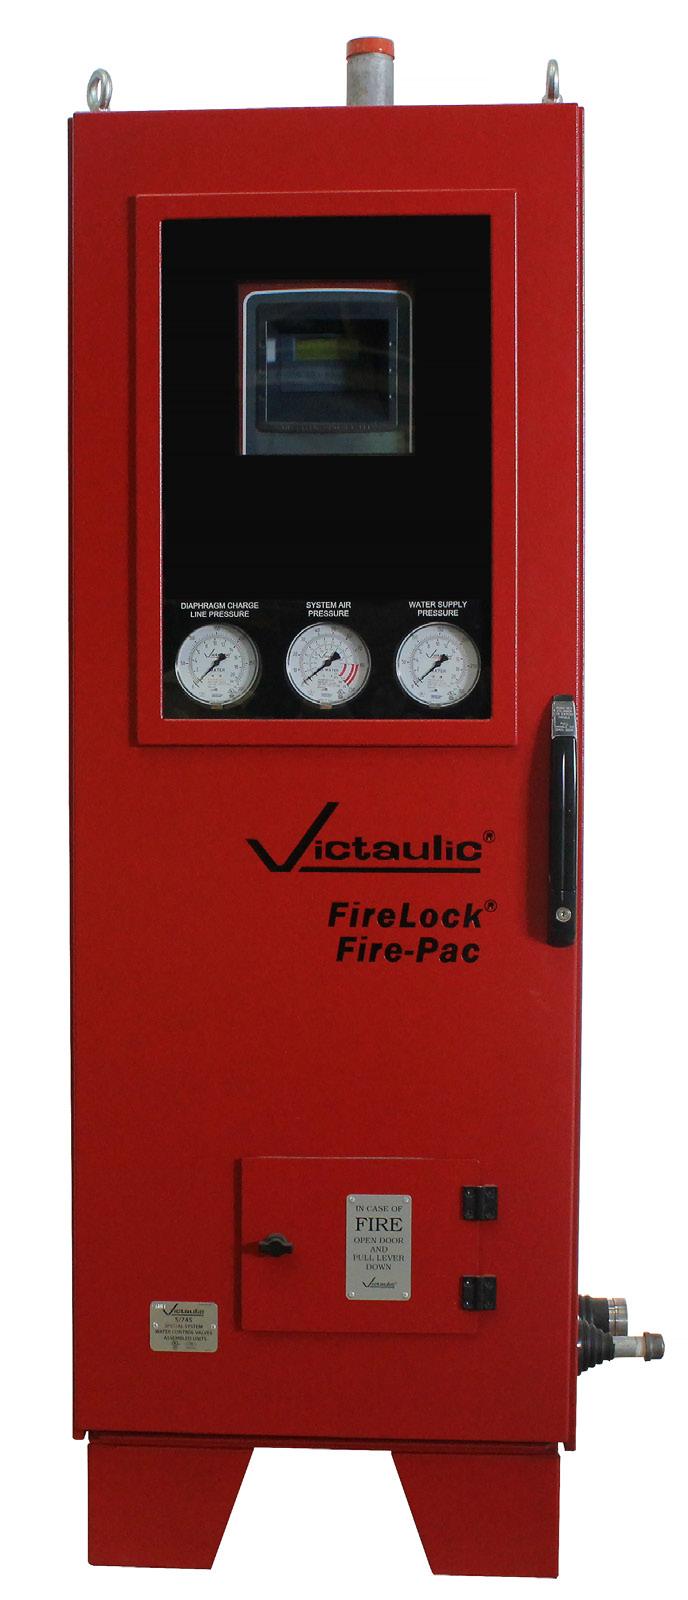 I-745 / Series 745 FireLock Fire-Pac for FireLock NXT Valves / Installation, Maintenance, Testing, and Wiring Manual REEIVING THE SHIPMENT The Victaulic Series 745 FireLock Fire-Pac is specified,